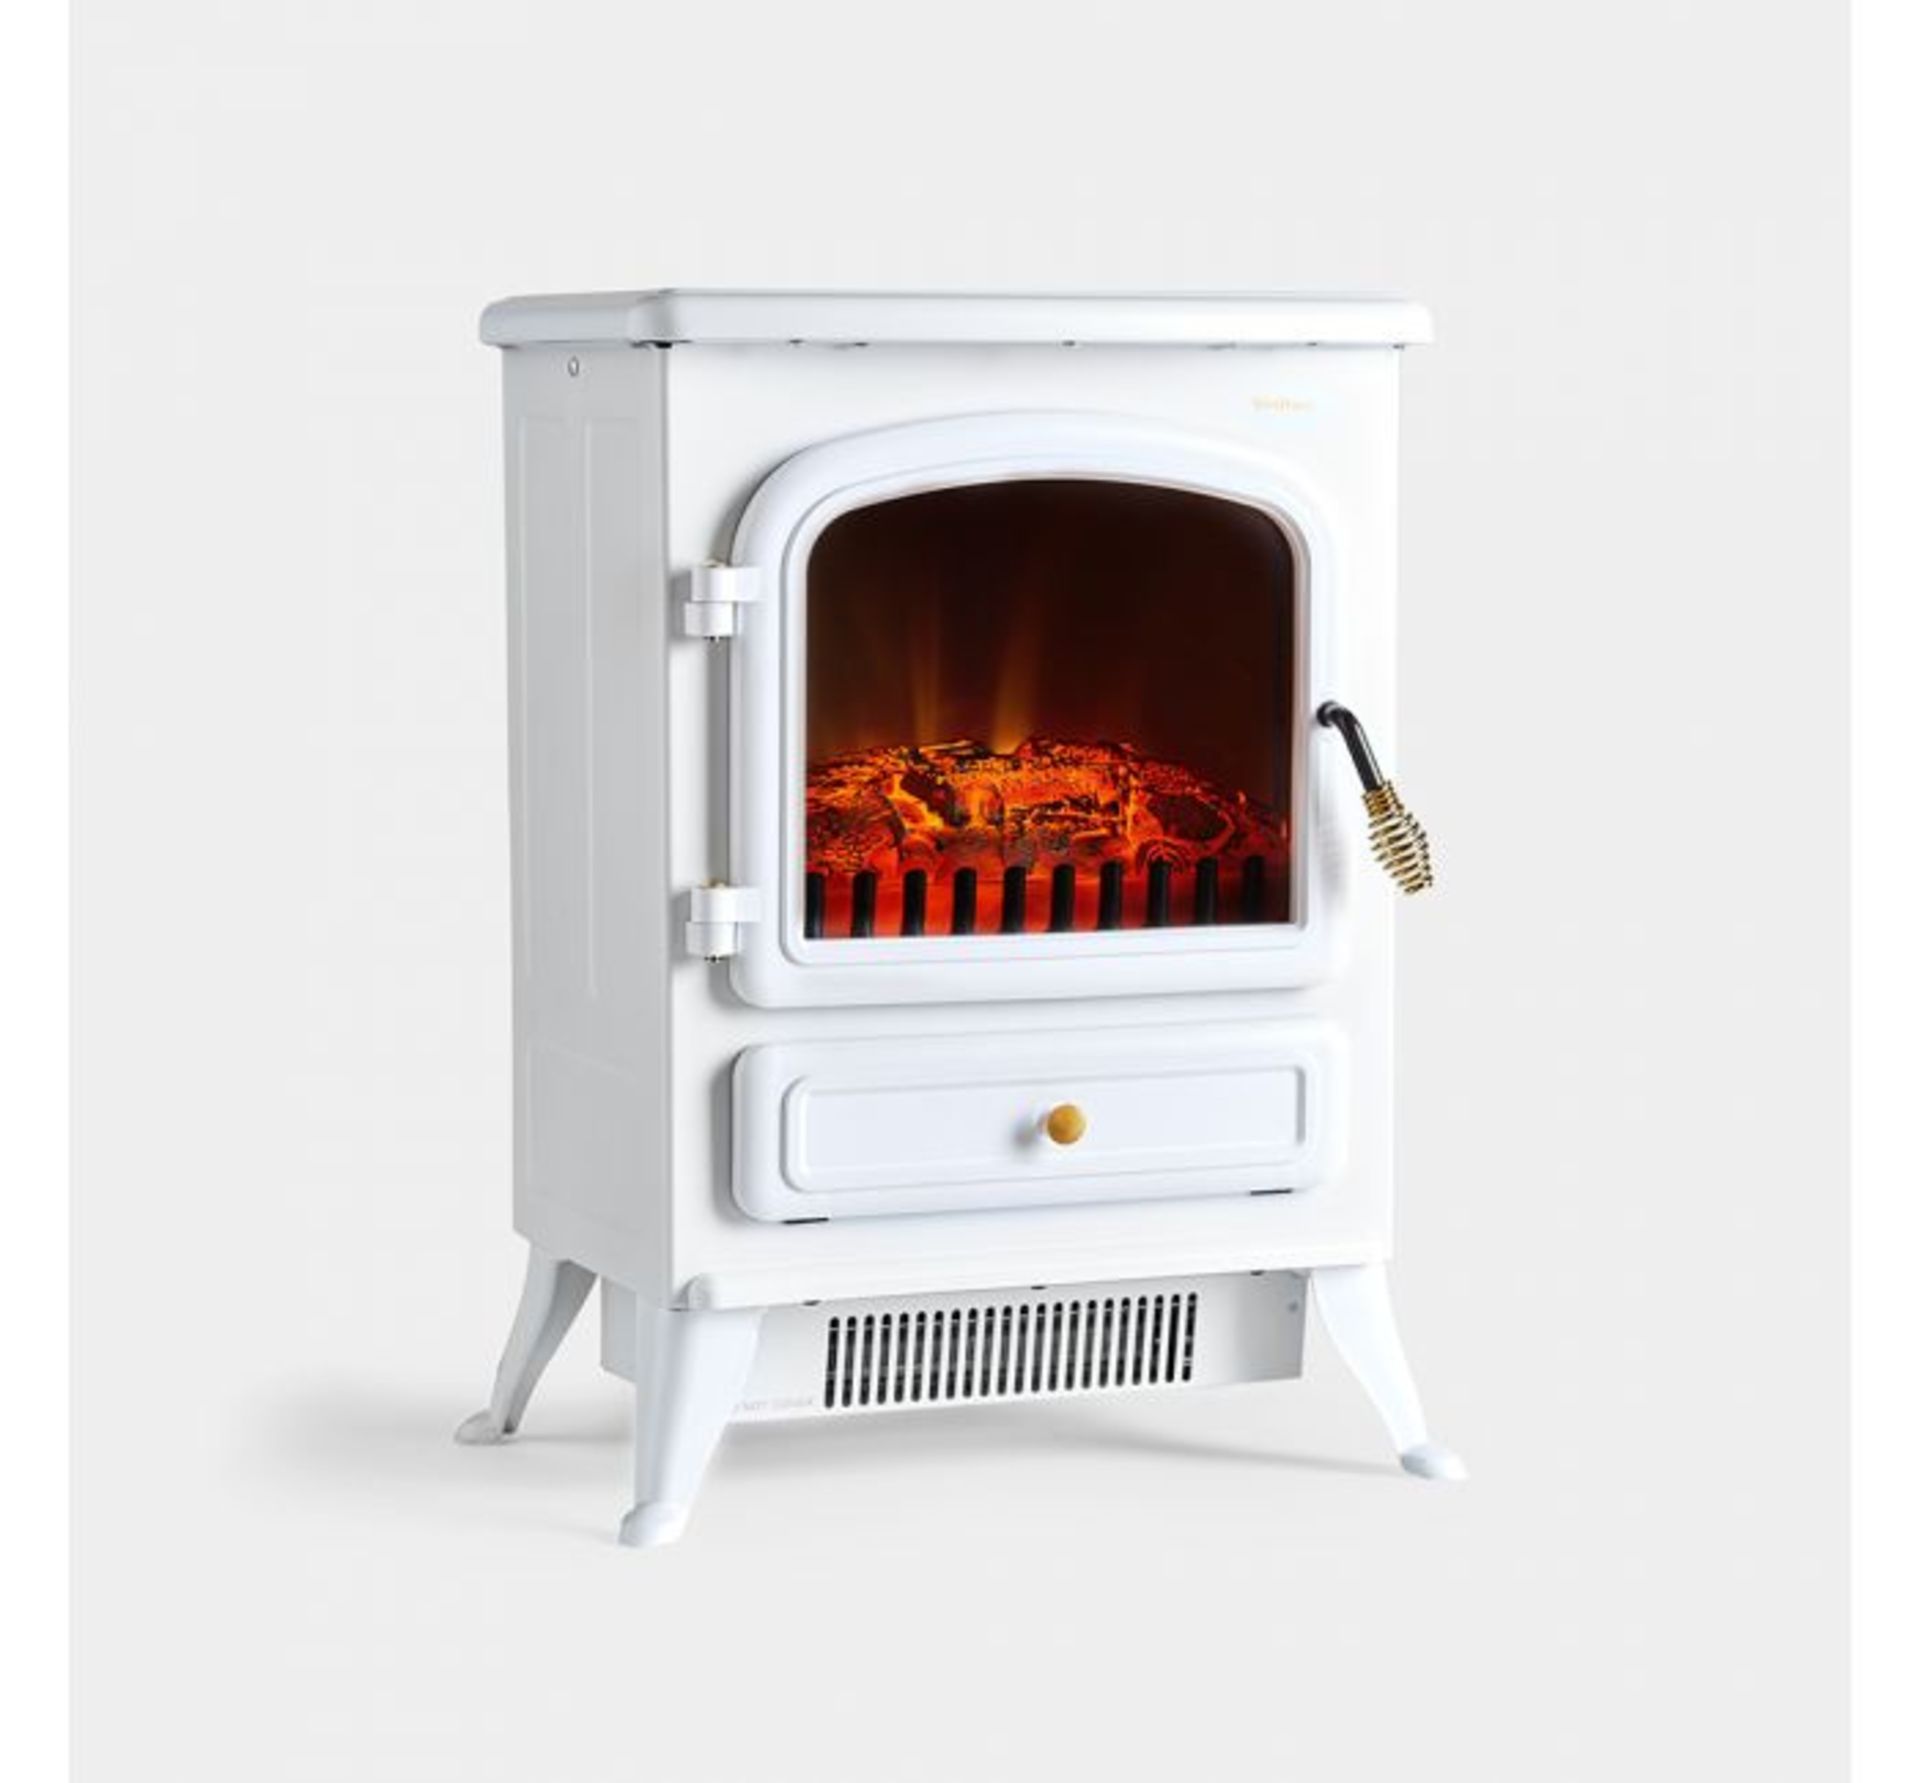 (HZ109) 1850W Portable Electric Stove Heater Two heat settings - 925W or 1850W Heats rooms up... - Image 2 of 3